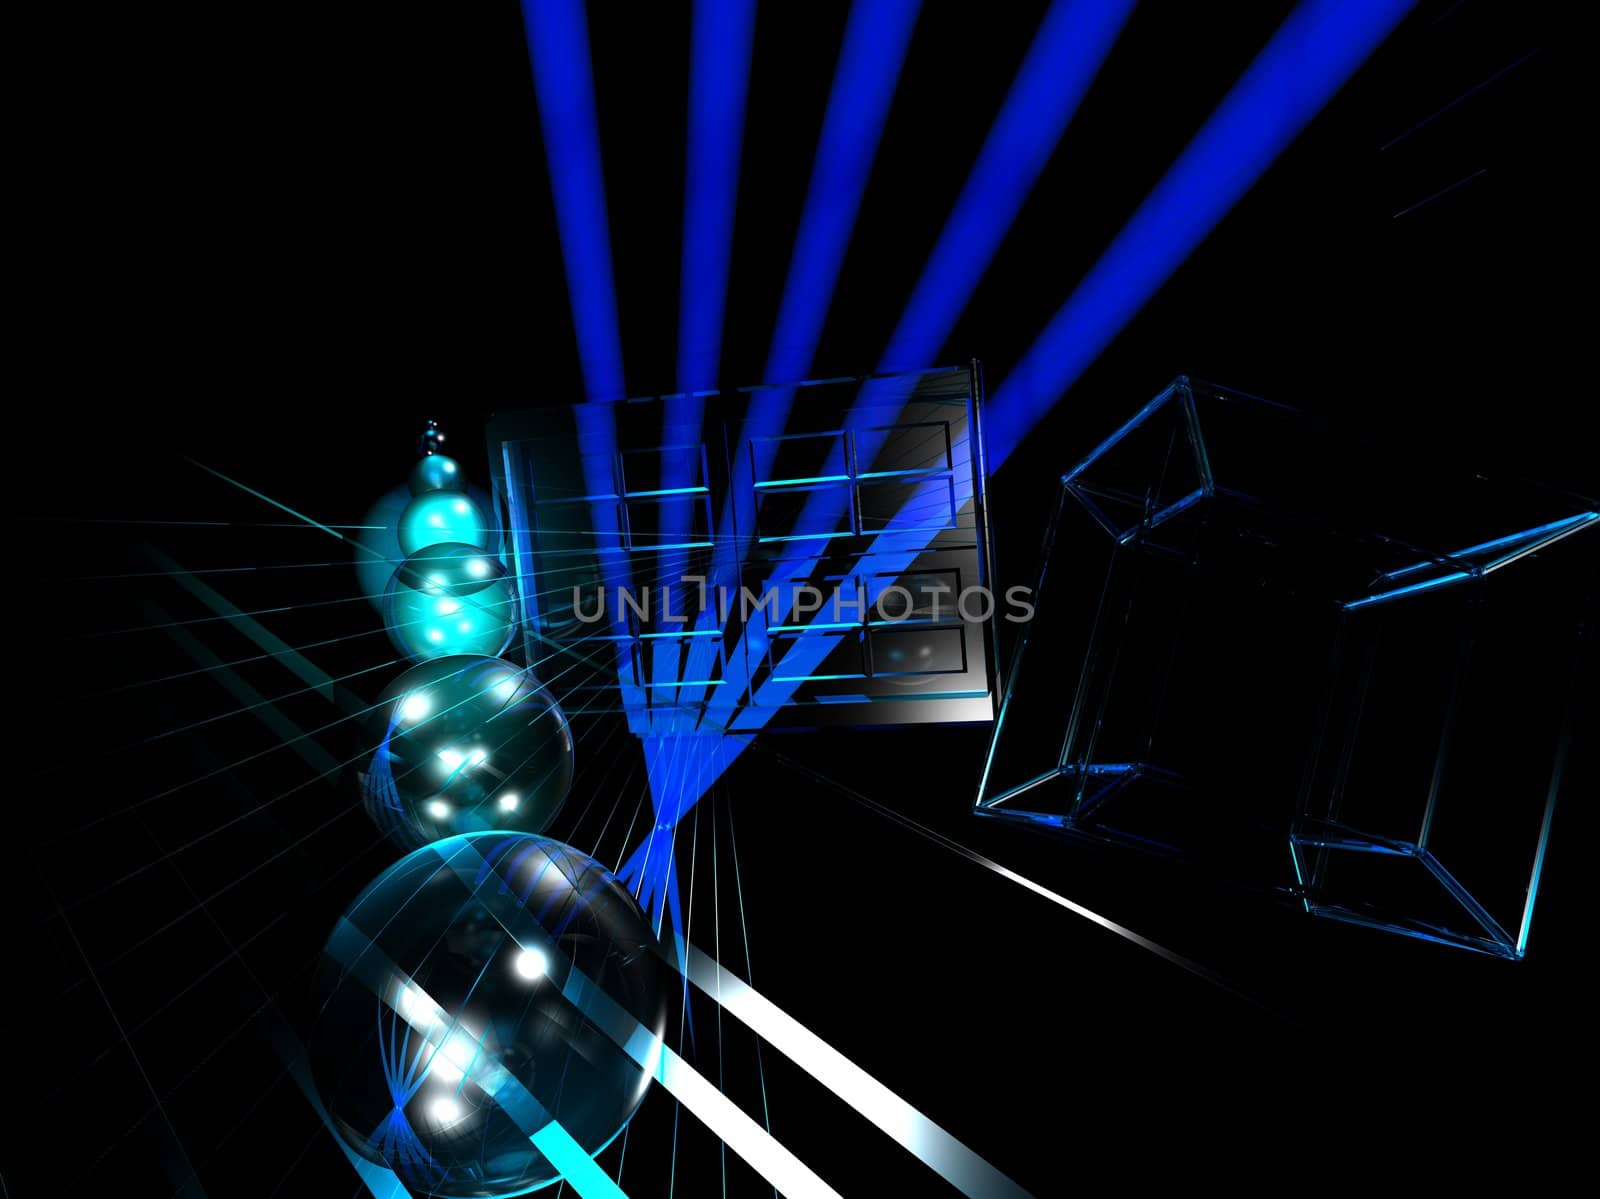 Abstract 3D image in cool color tones with several repeating elements.